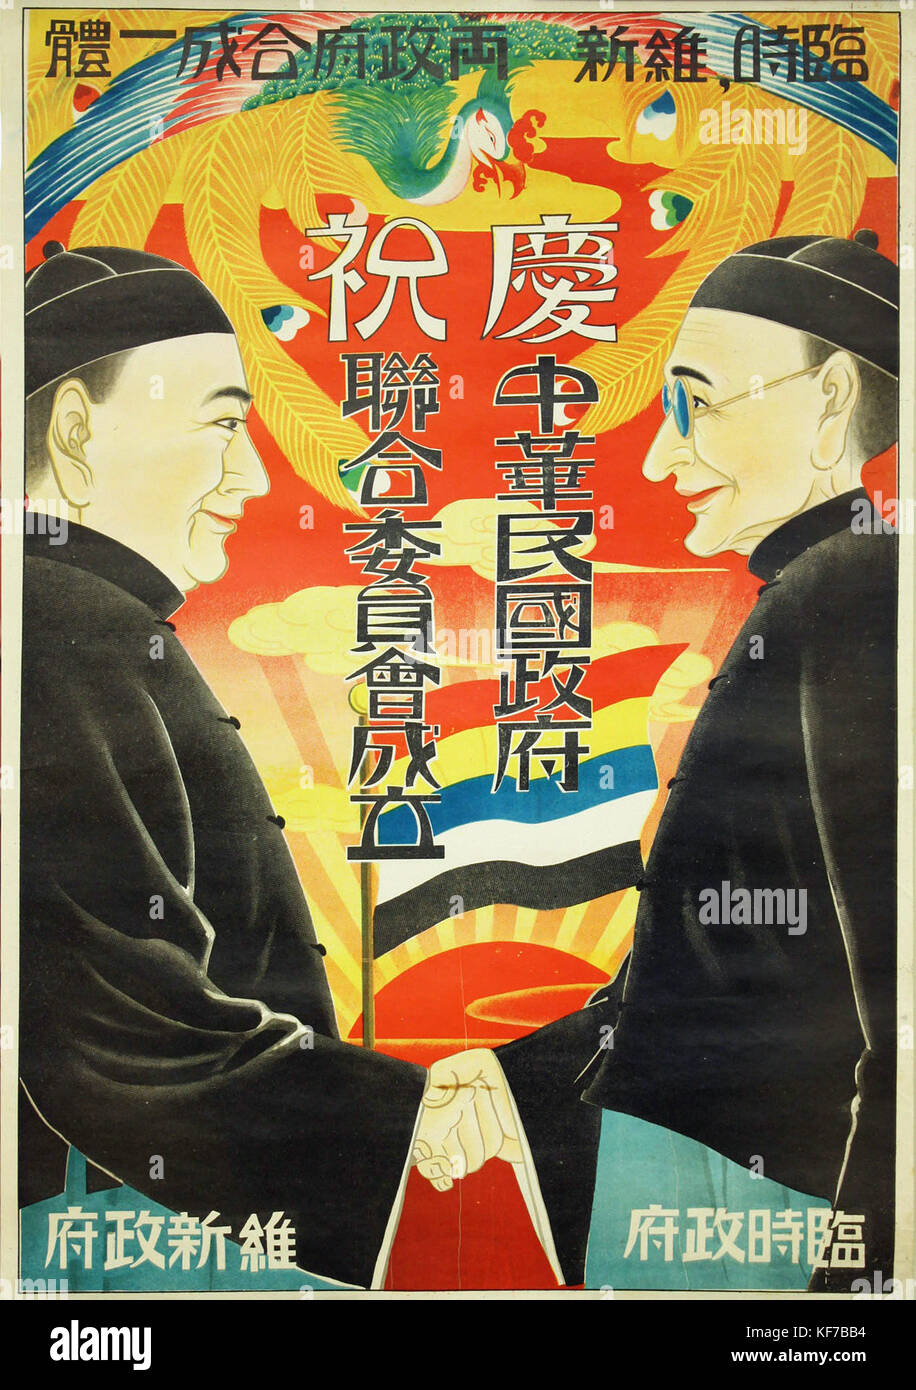 Propaganda Poster In Chinese Produced By Japanese Sponsored